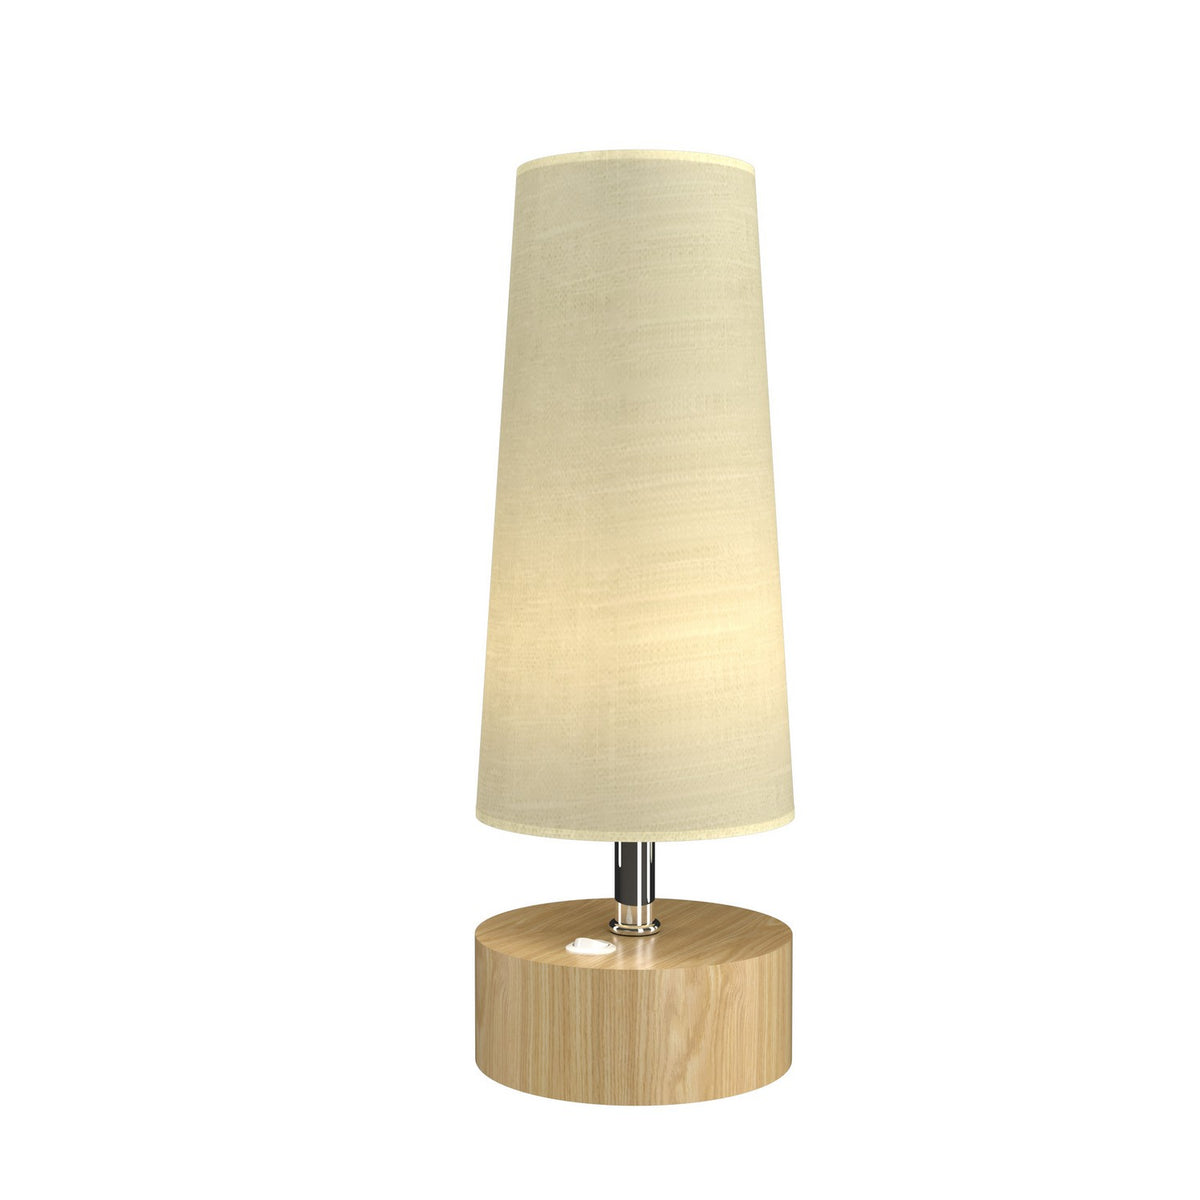 Accord Lighting - 7101.45 - LED Table Lamp - Clean - Sand